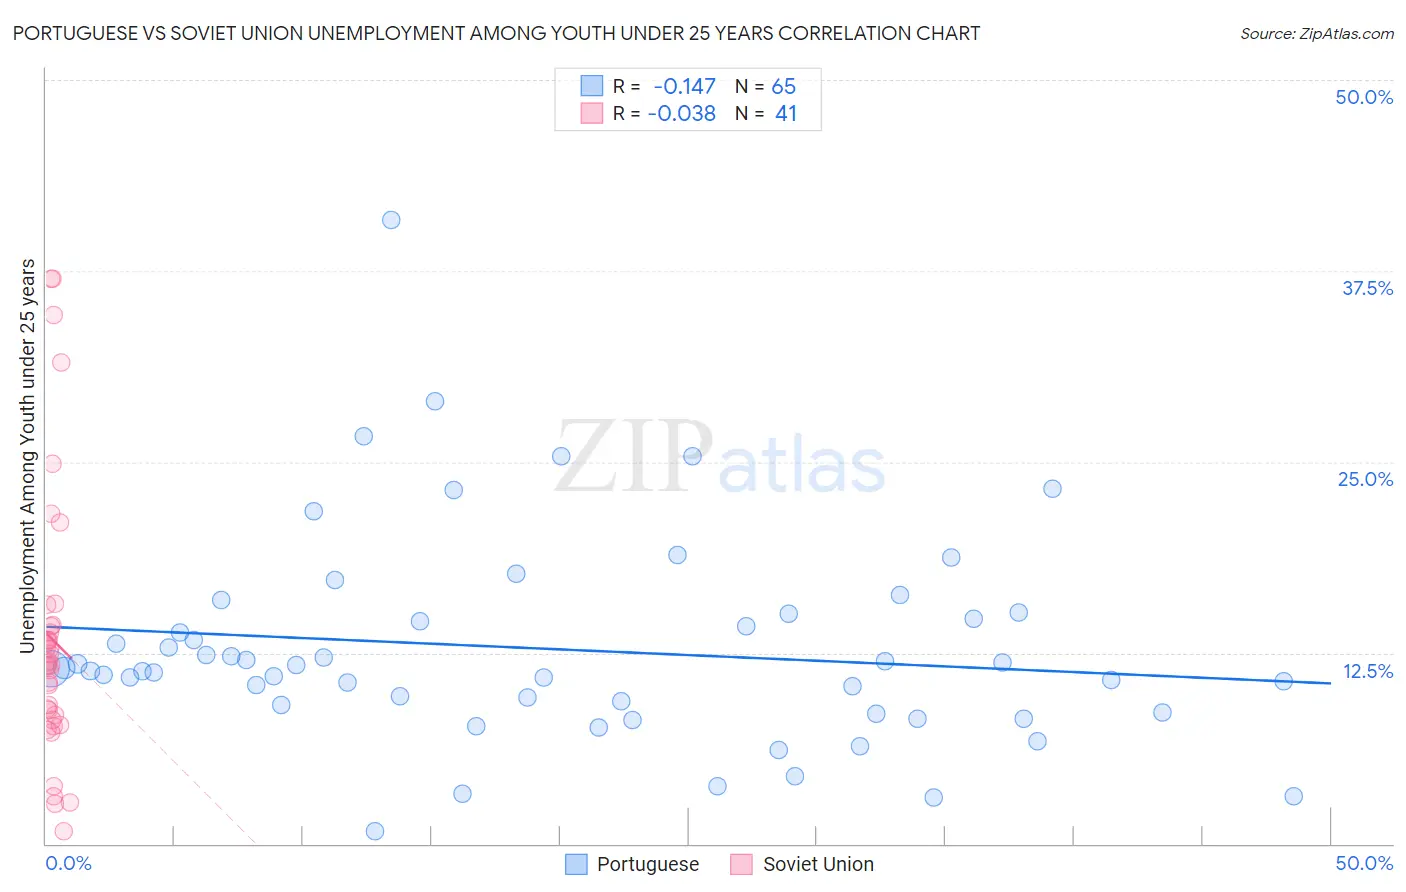 Portuguese vs Soviet Union Unemployment Among Youth under 25 years